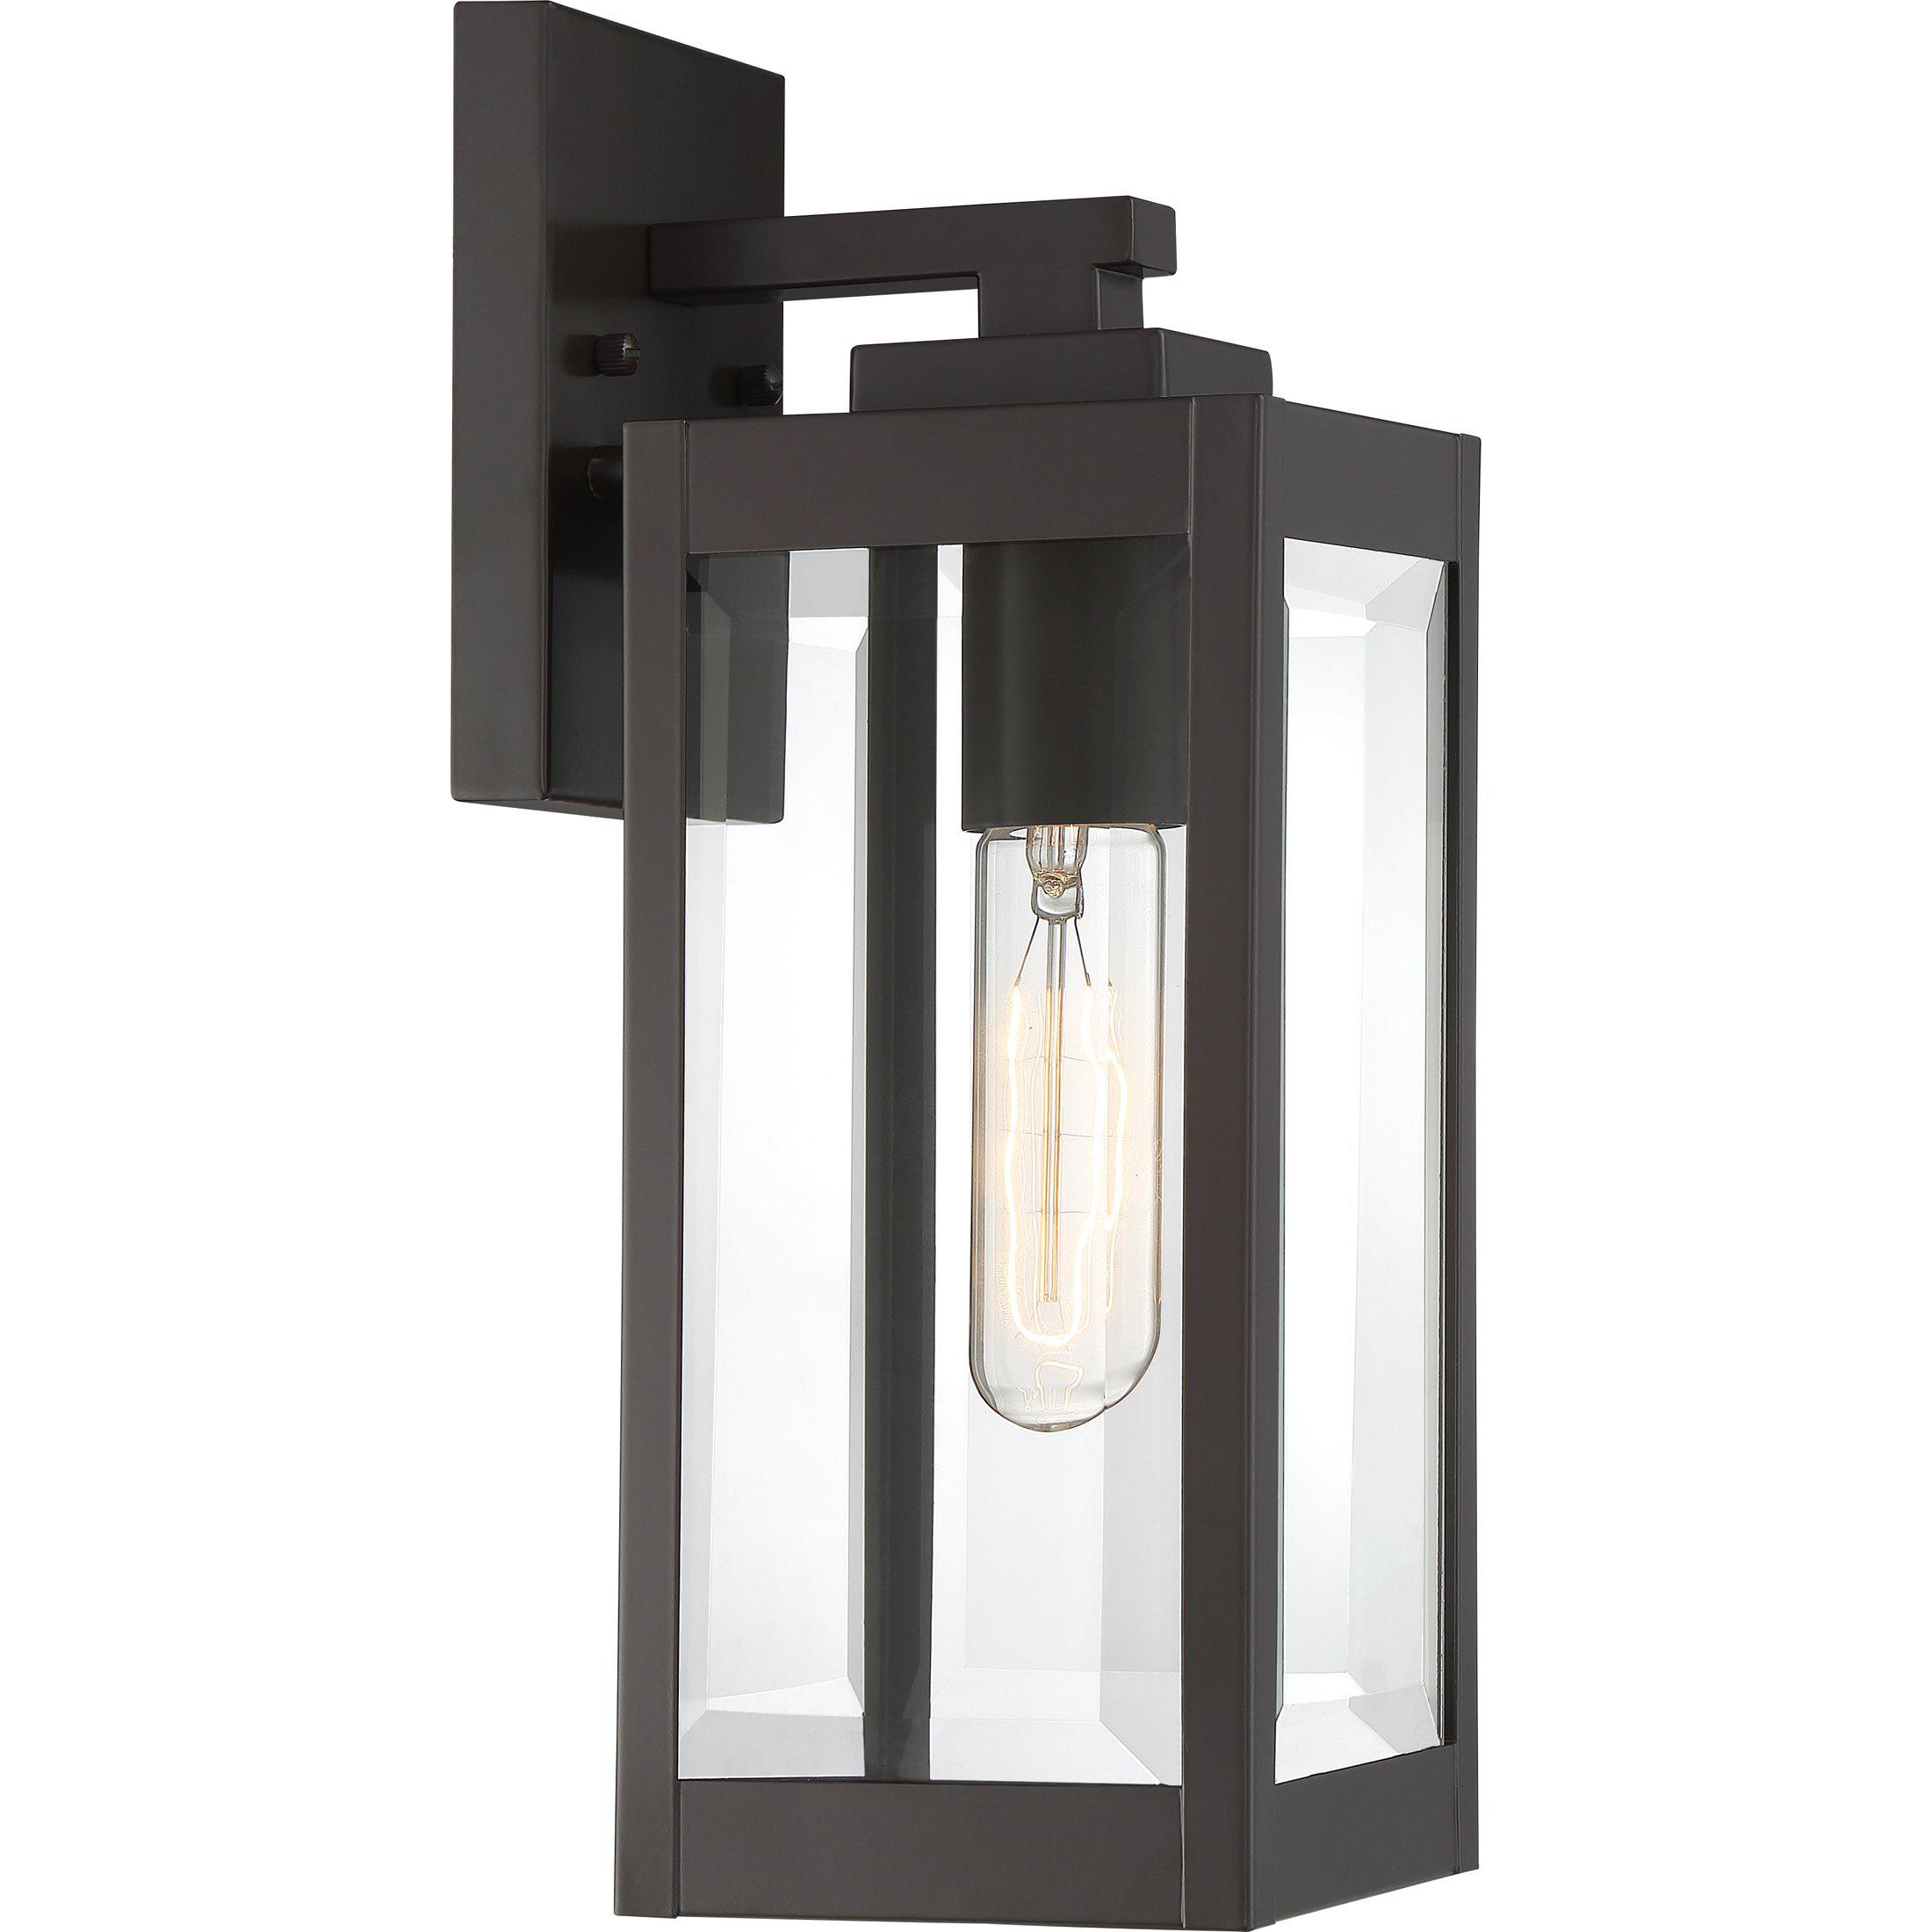 Quoizel Westover Outdoor Lantern, Small WVR8405 | Overstock Outdoor l Wall Quoizel Inc   